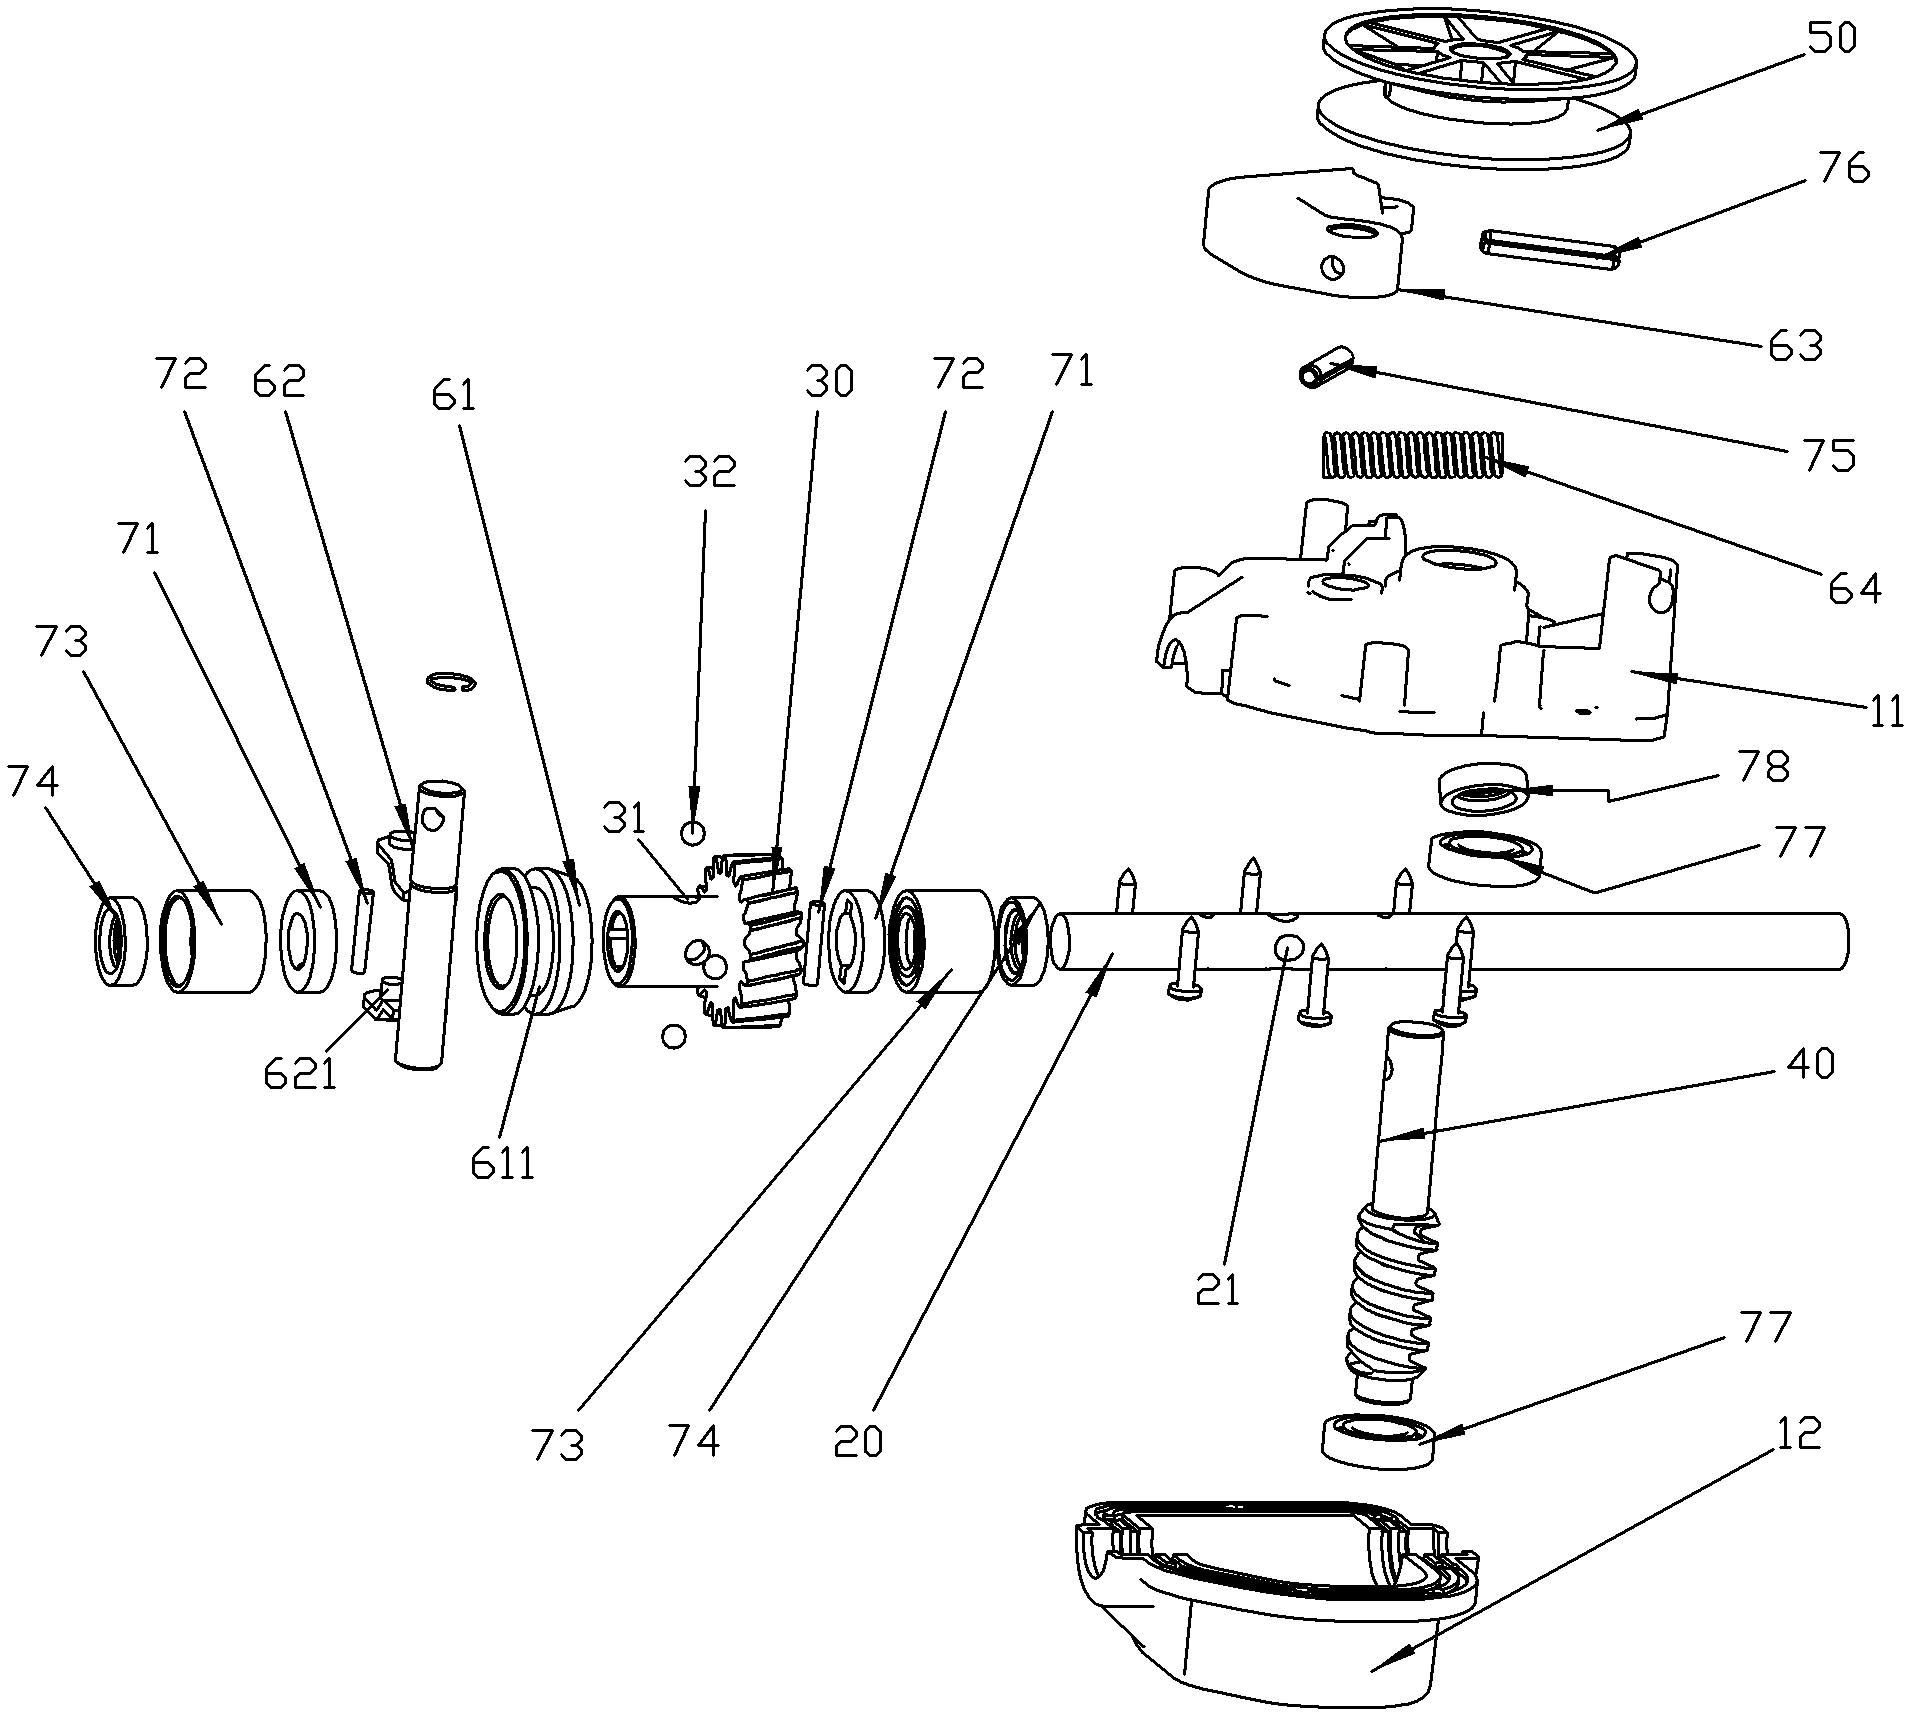 Clutch transmission device of self-propelled mower